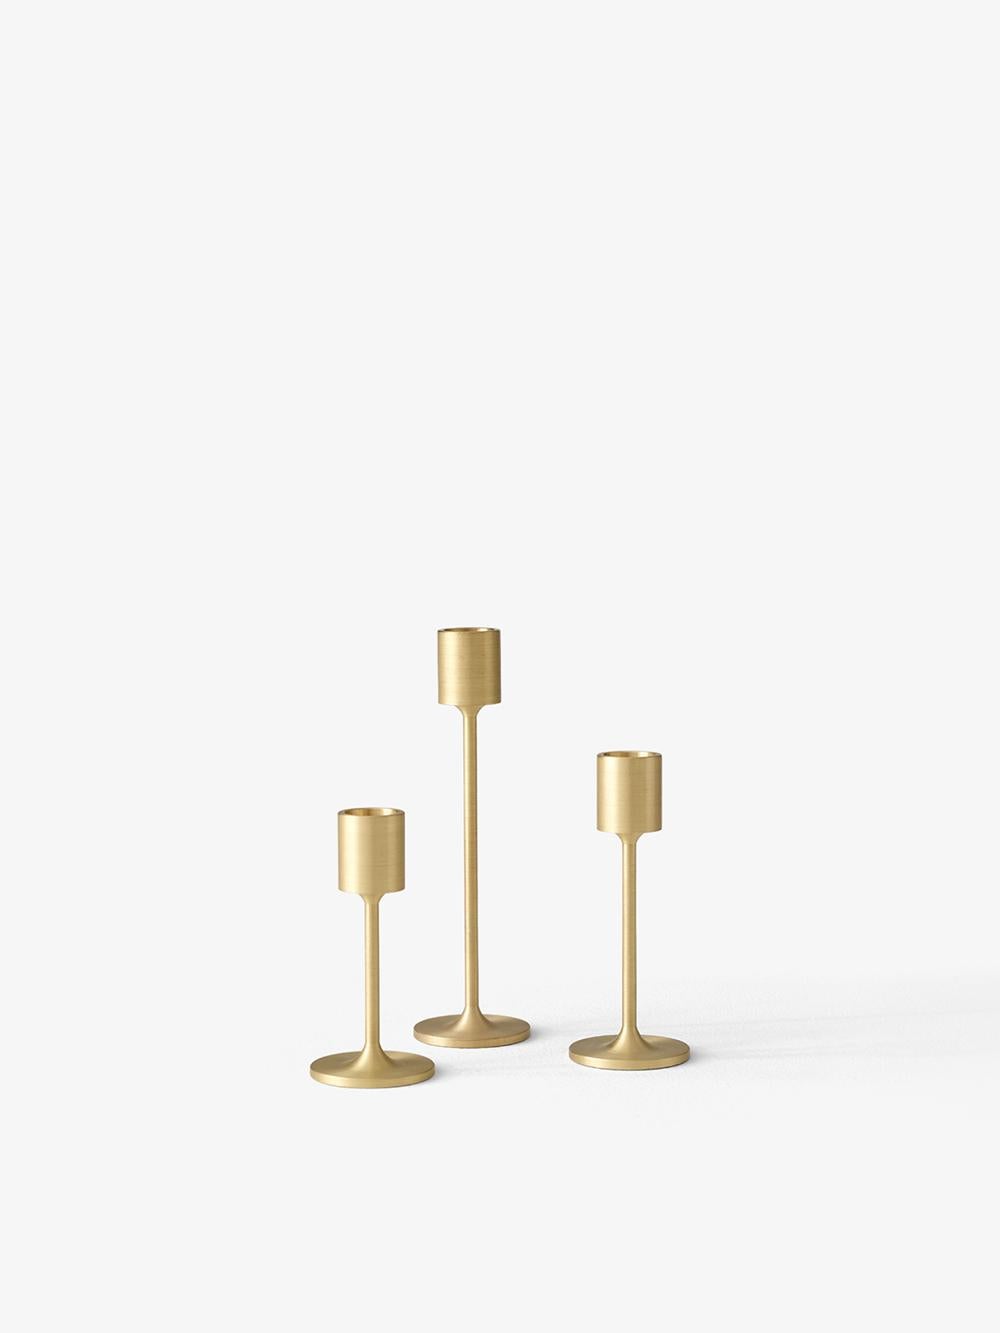 Inspired by the striking simplicity of Doric columns found in Ancient Greece, this gleaming brushed brass candleholder is a sculptural addition to the home. 
It is the biggest of the Collect cardholders, designed by Space Copenhagen.